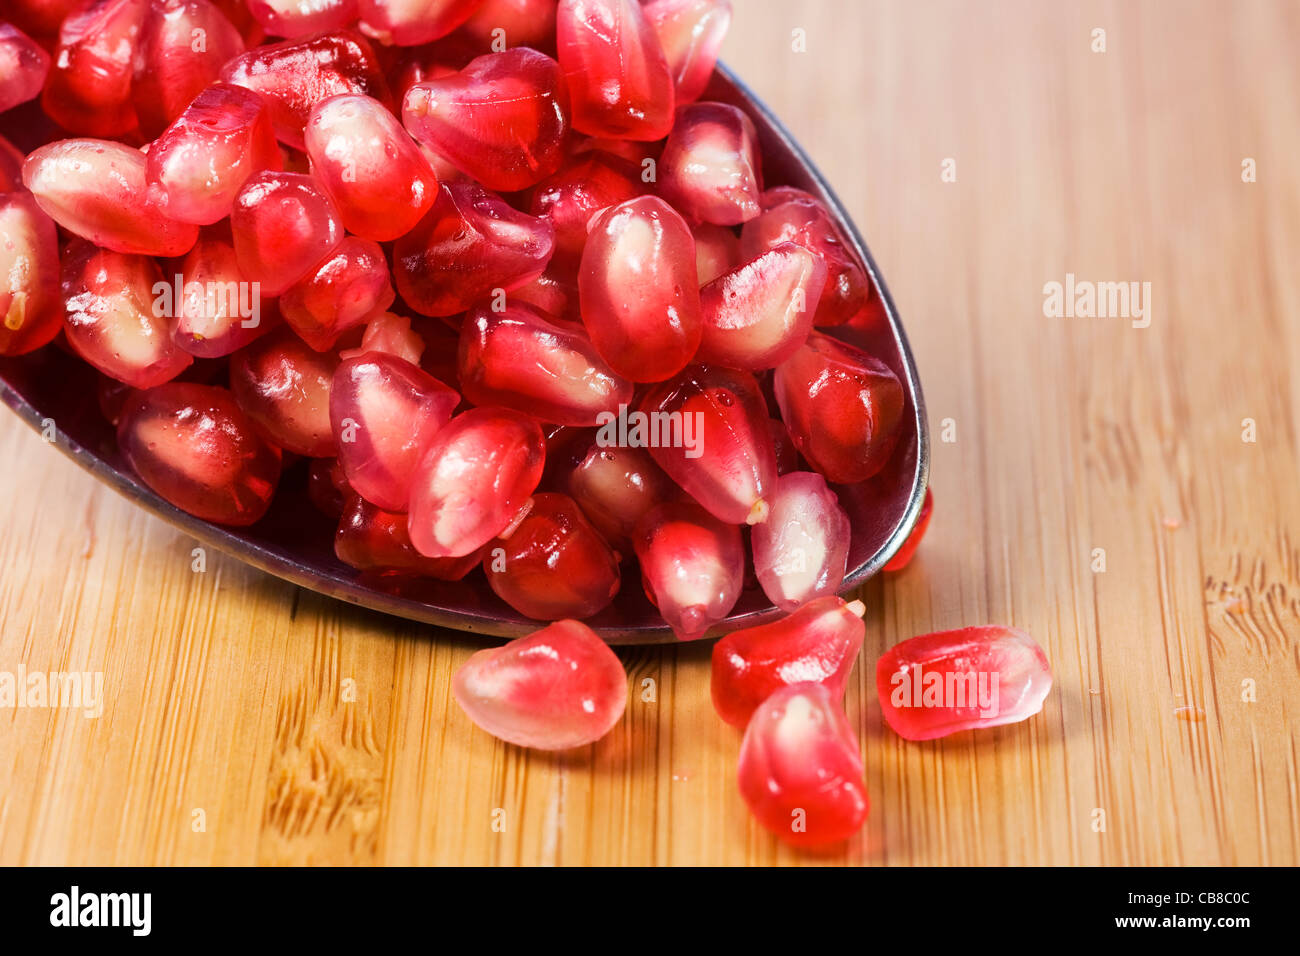 Punica granatum. A spoonful of pomegranate arils on a bamboo board. Stock Photo